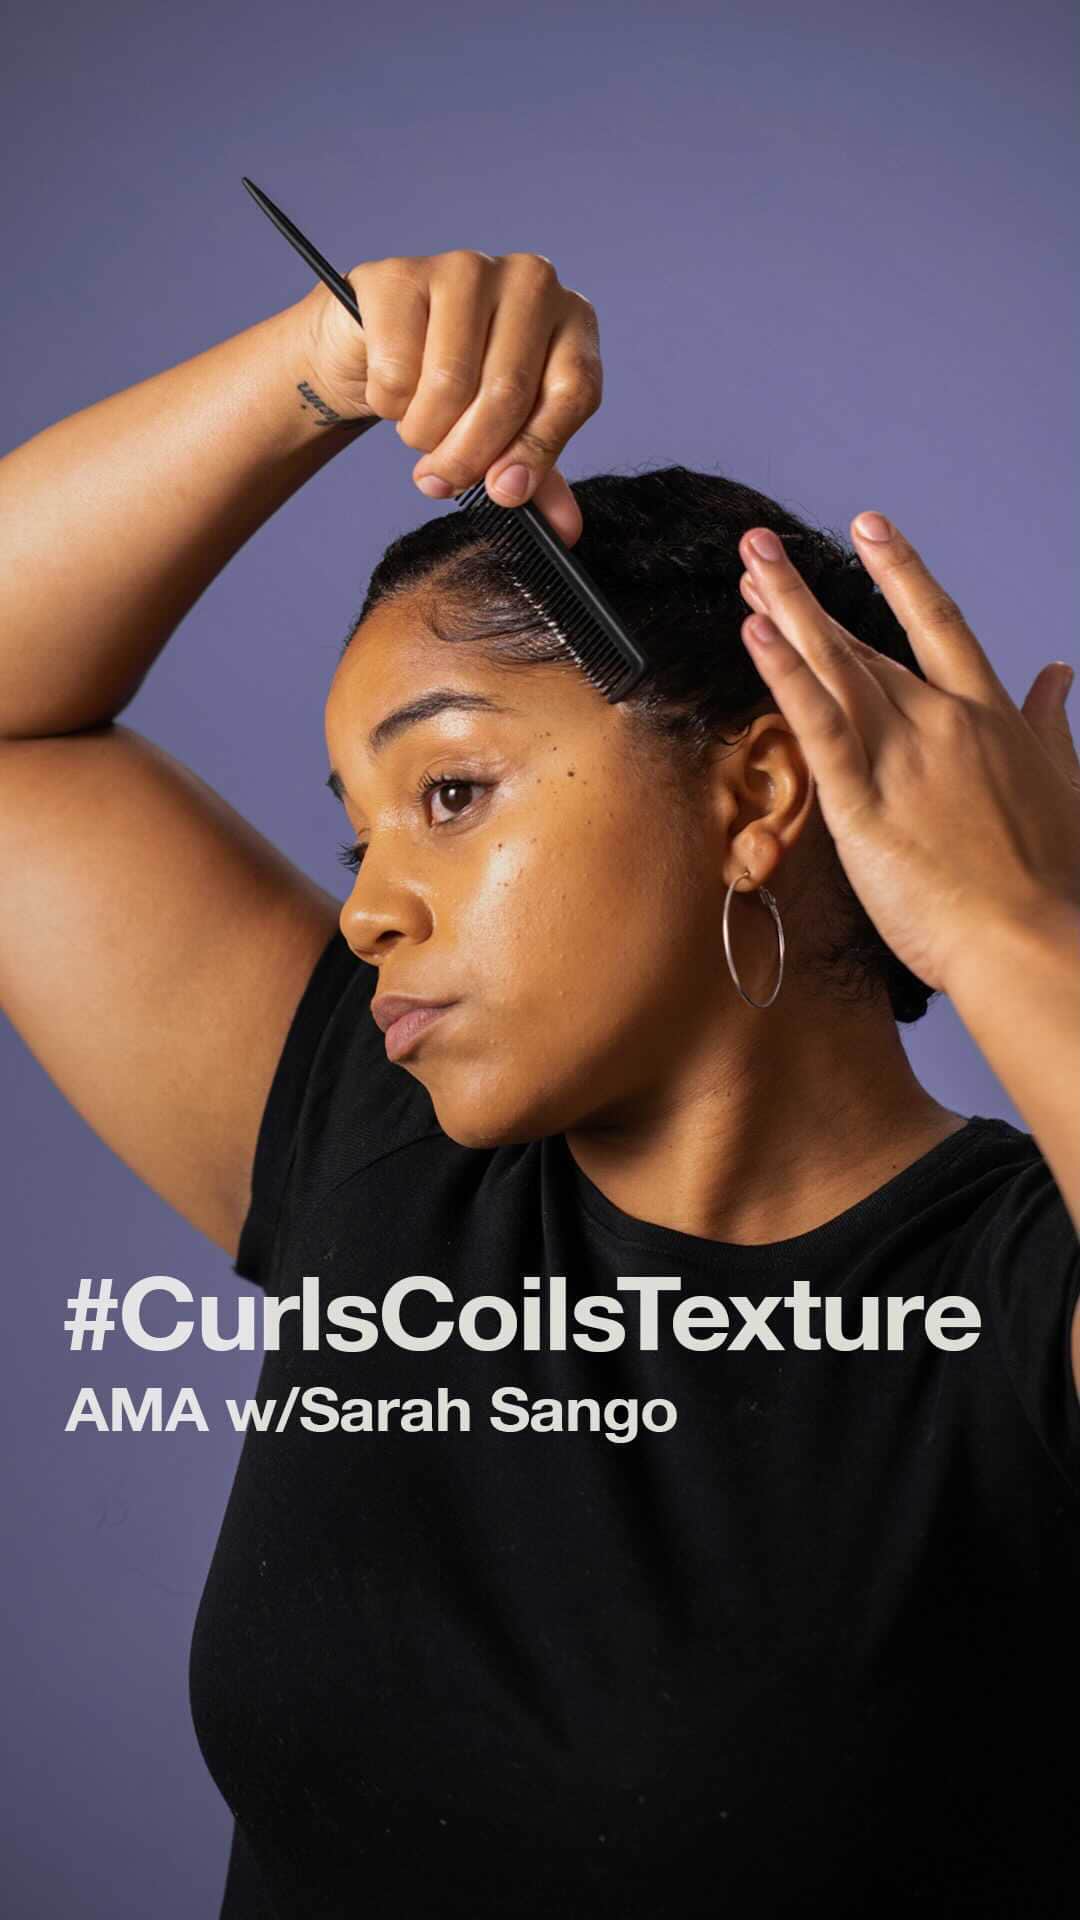 LUSH Cosmeticsのインスタグラム：「Introducing Lush’s new haircare range for curly, coily and textured hair: a range created by Lush Black Haircare Specialist Sarah Sango (@lushhairlab_sarah) and catering to everything from defining your coils to servicing your scalp. Brand and Product Expert, Erica Vega, chats with Sarah about the range, her journey to the Hair Lab and a possible sneak peek 😲  Shop #CurlsCoilsTexture👇👇  Full range: https://bit.ly/3i23EHc  Renee's Shea Souffle: https://bit.ly/38warG1  Avocado Co-Wash: https://bit.ly/2XxDbb6  Super Milk Conditioning Hair Primer: https://bit.ly/3i5zZwJ  Power Conditioner: https://bit.ly/38xlWgw  Glory Conditioner: https://bit.ly/3i4pN7J  Curl Power Hair Cream: https://bit.ly/2LCdhjQ  #haircare #curls #curlyhair #healthyhair #hairgoals #selfcare #naturalhair」